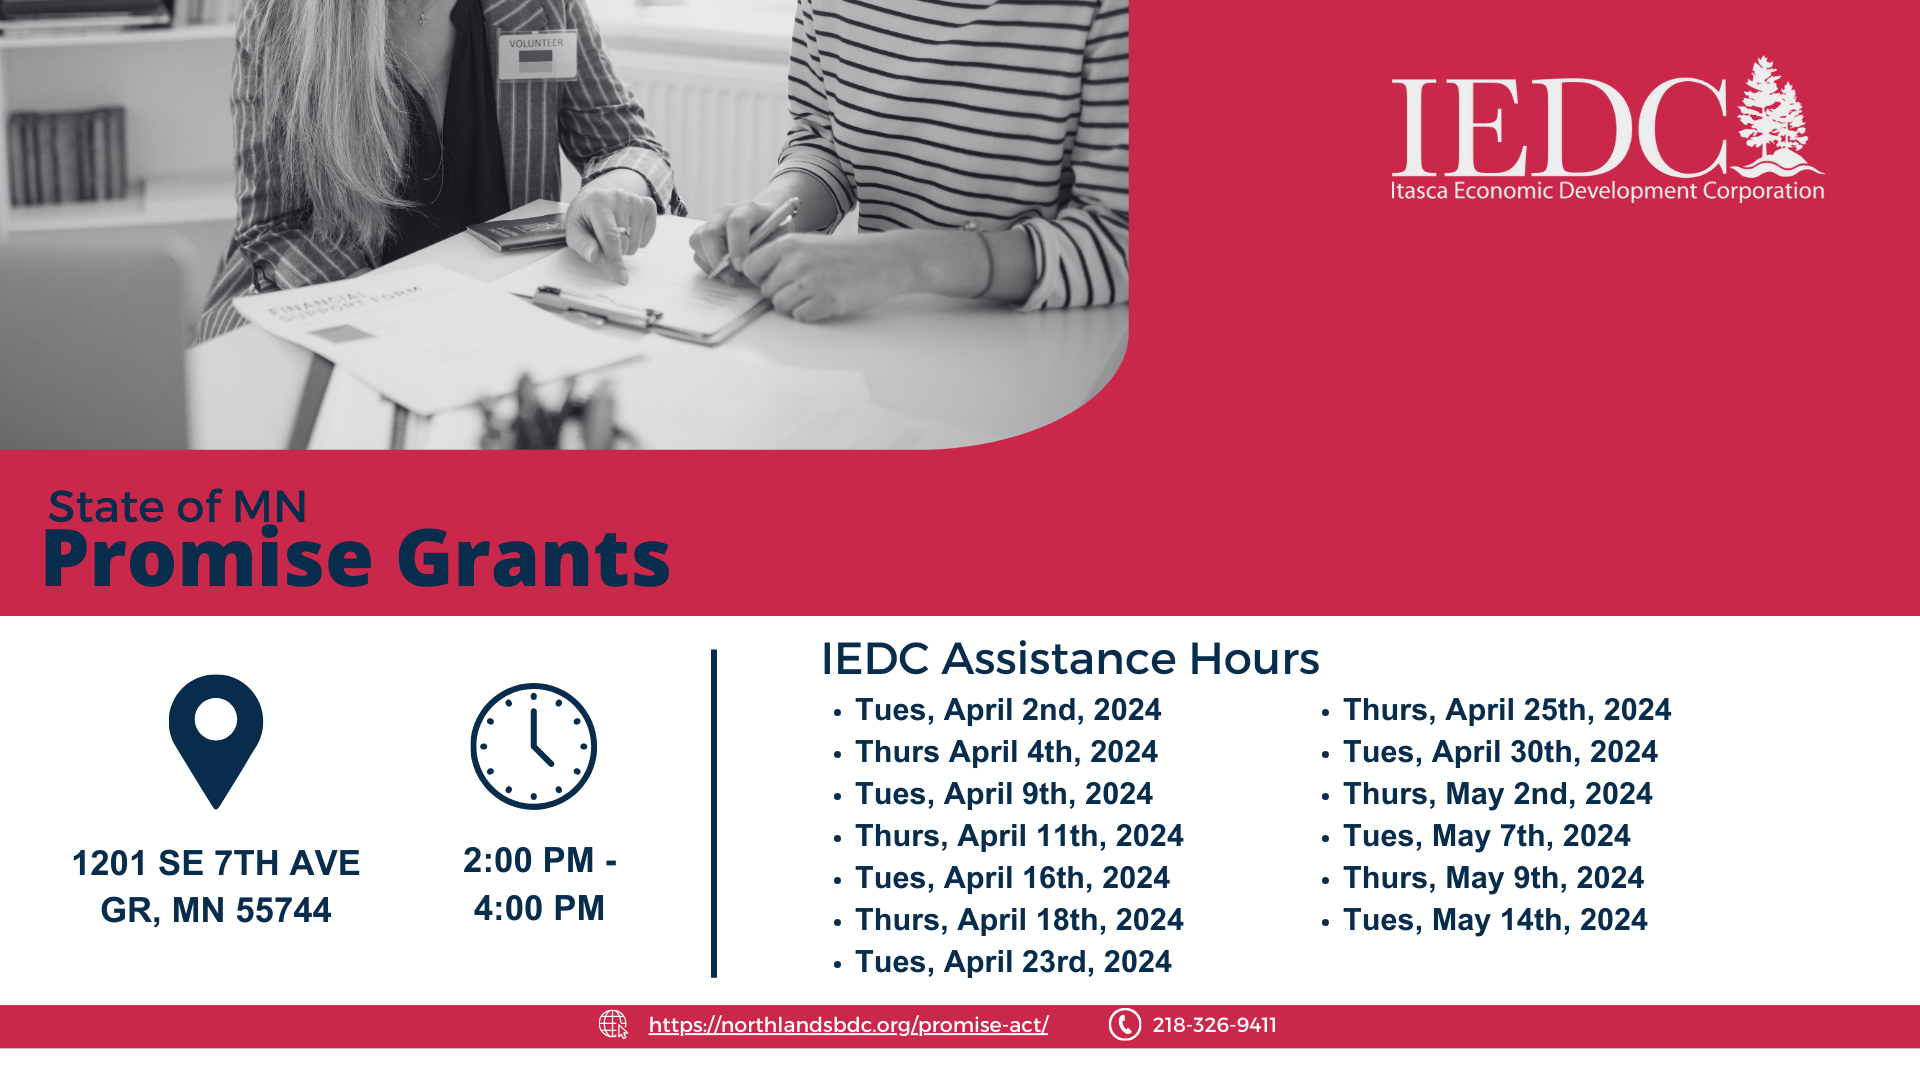 Event Promo Photo For IEDC Promise Grant Assistance Hours